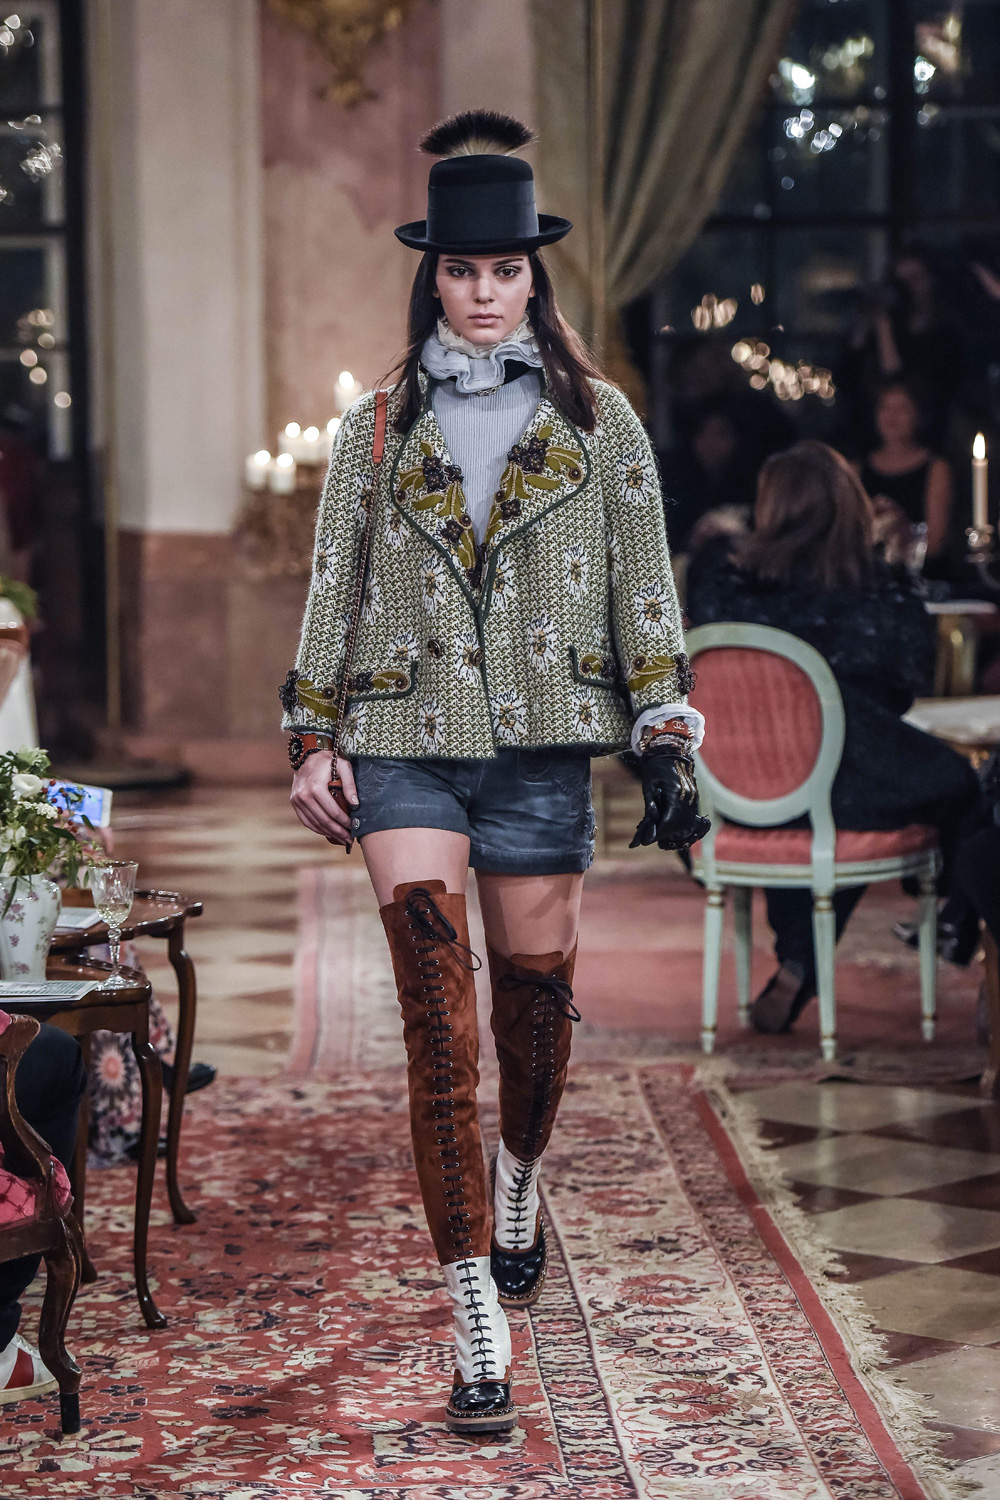 Chanel's Metiers d'Art Paris-Salzburg Show: See All The Pictures